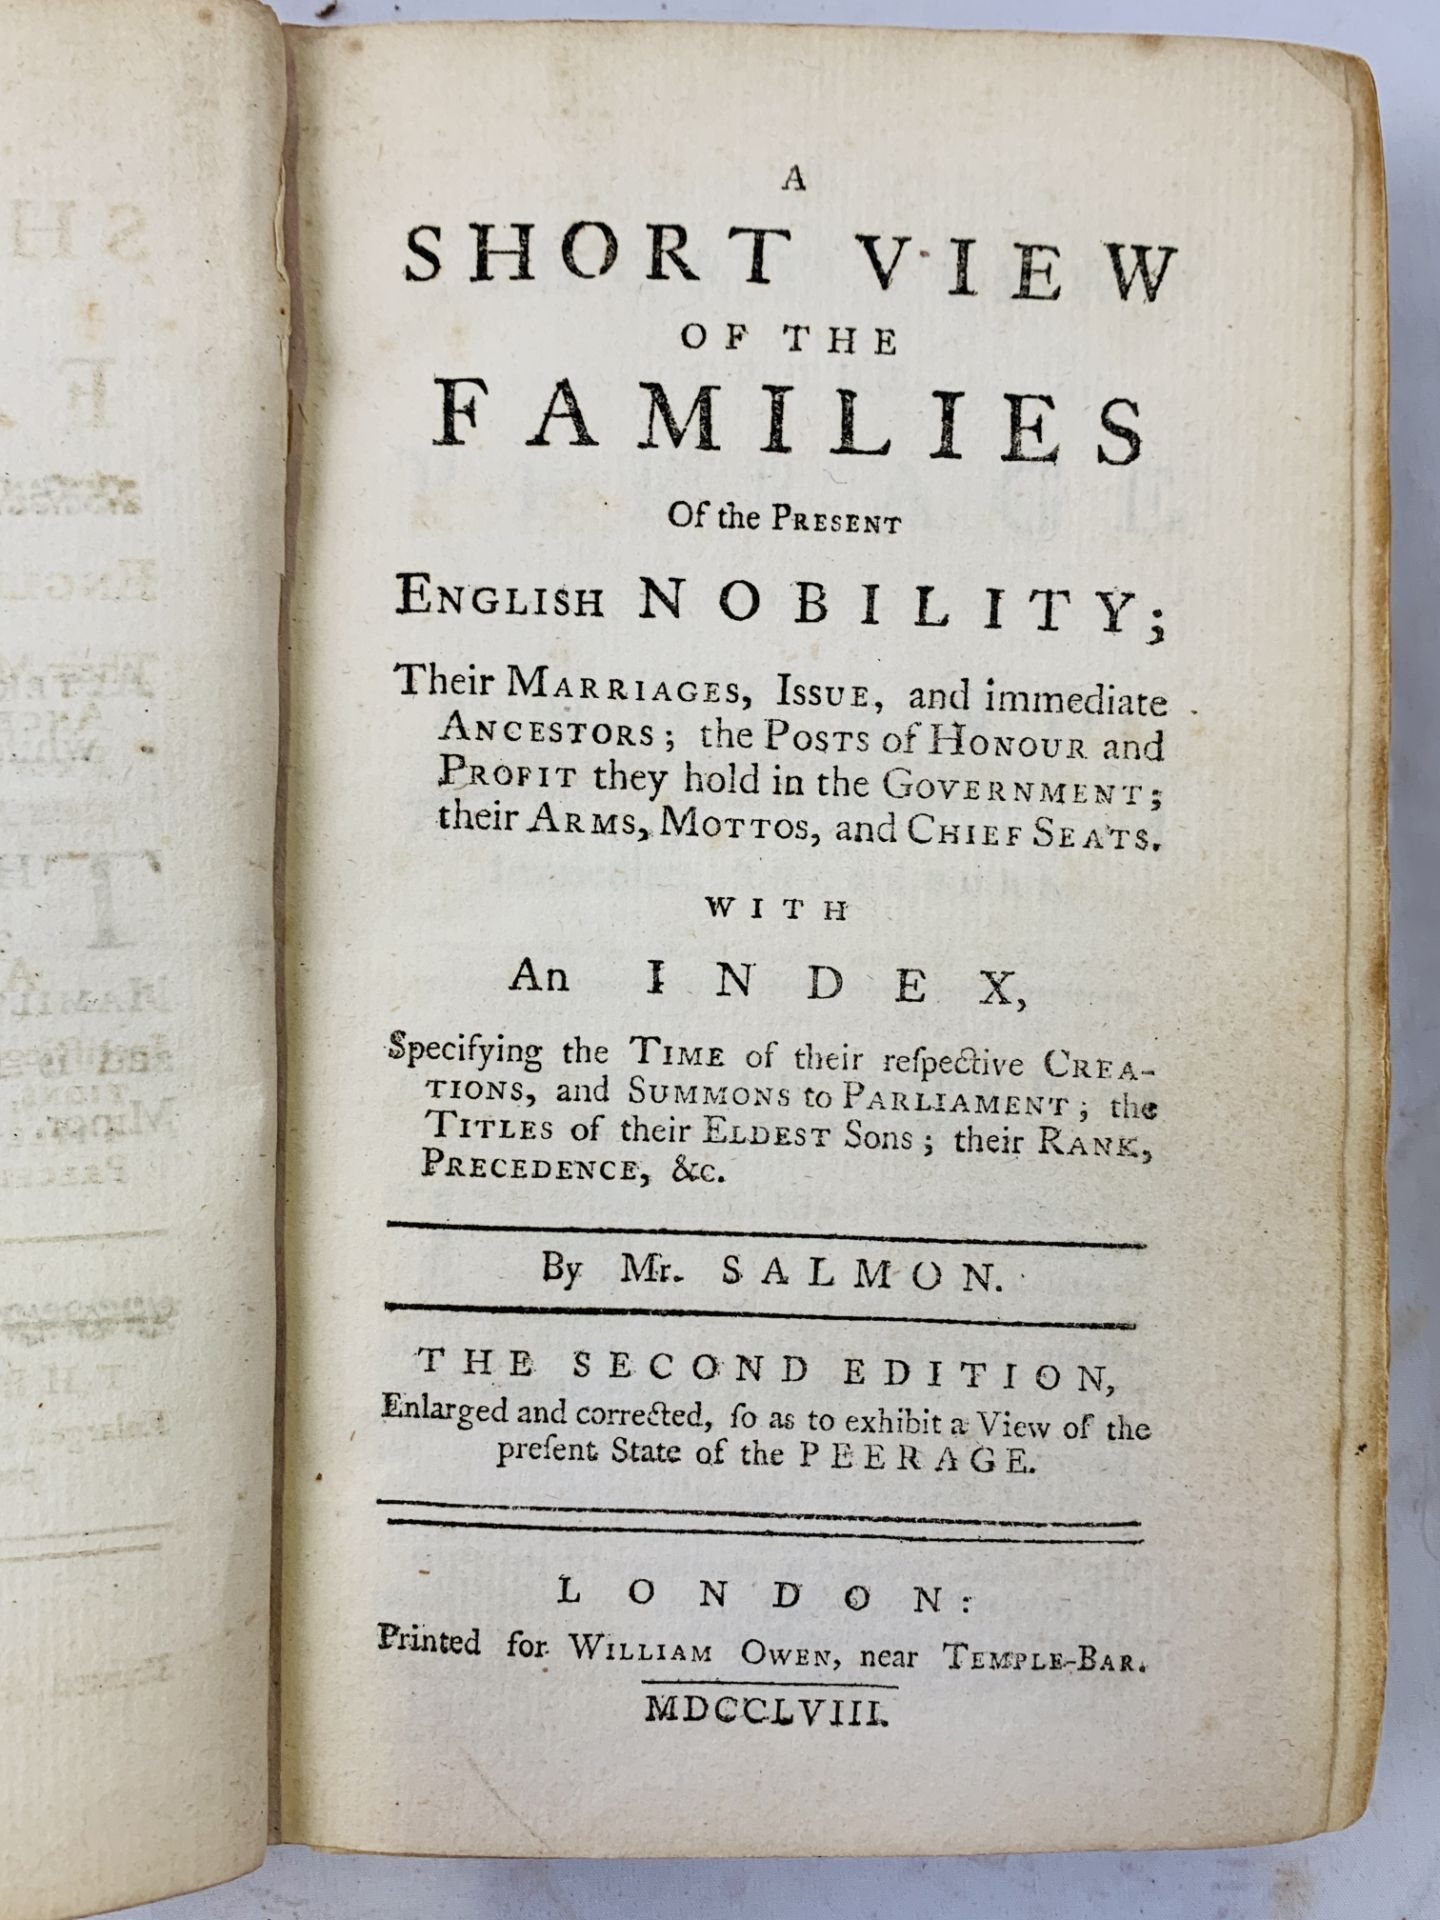 A Short View of the Families of the Present English Nobility, 1758 by Mr Salmon - Image 2 of 4